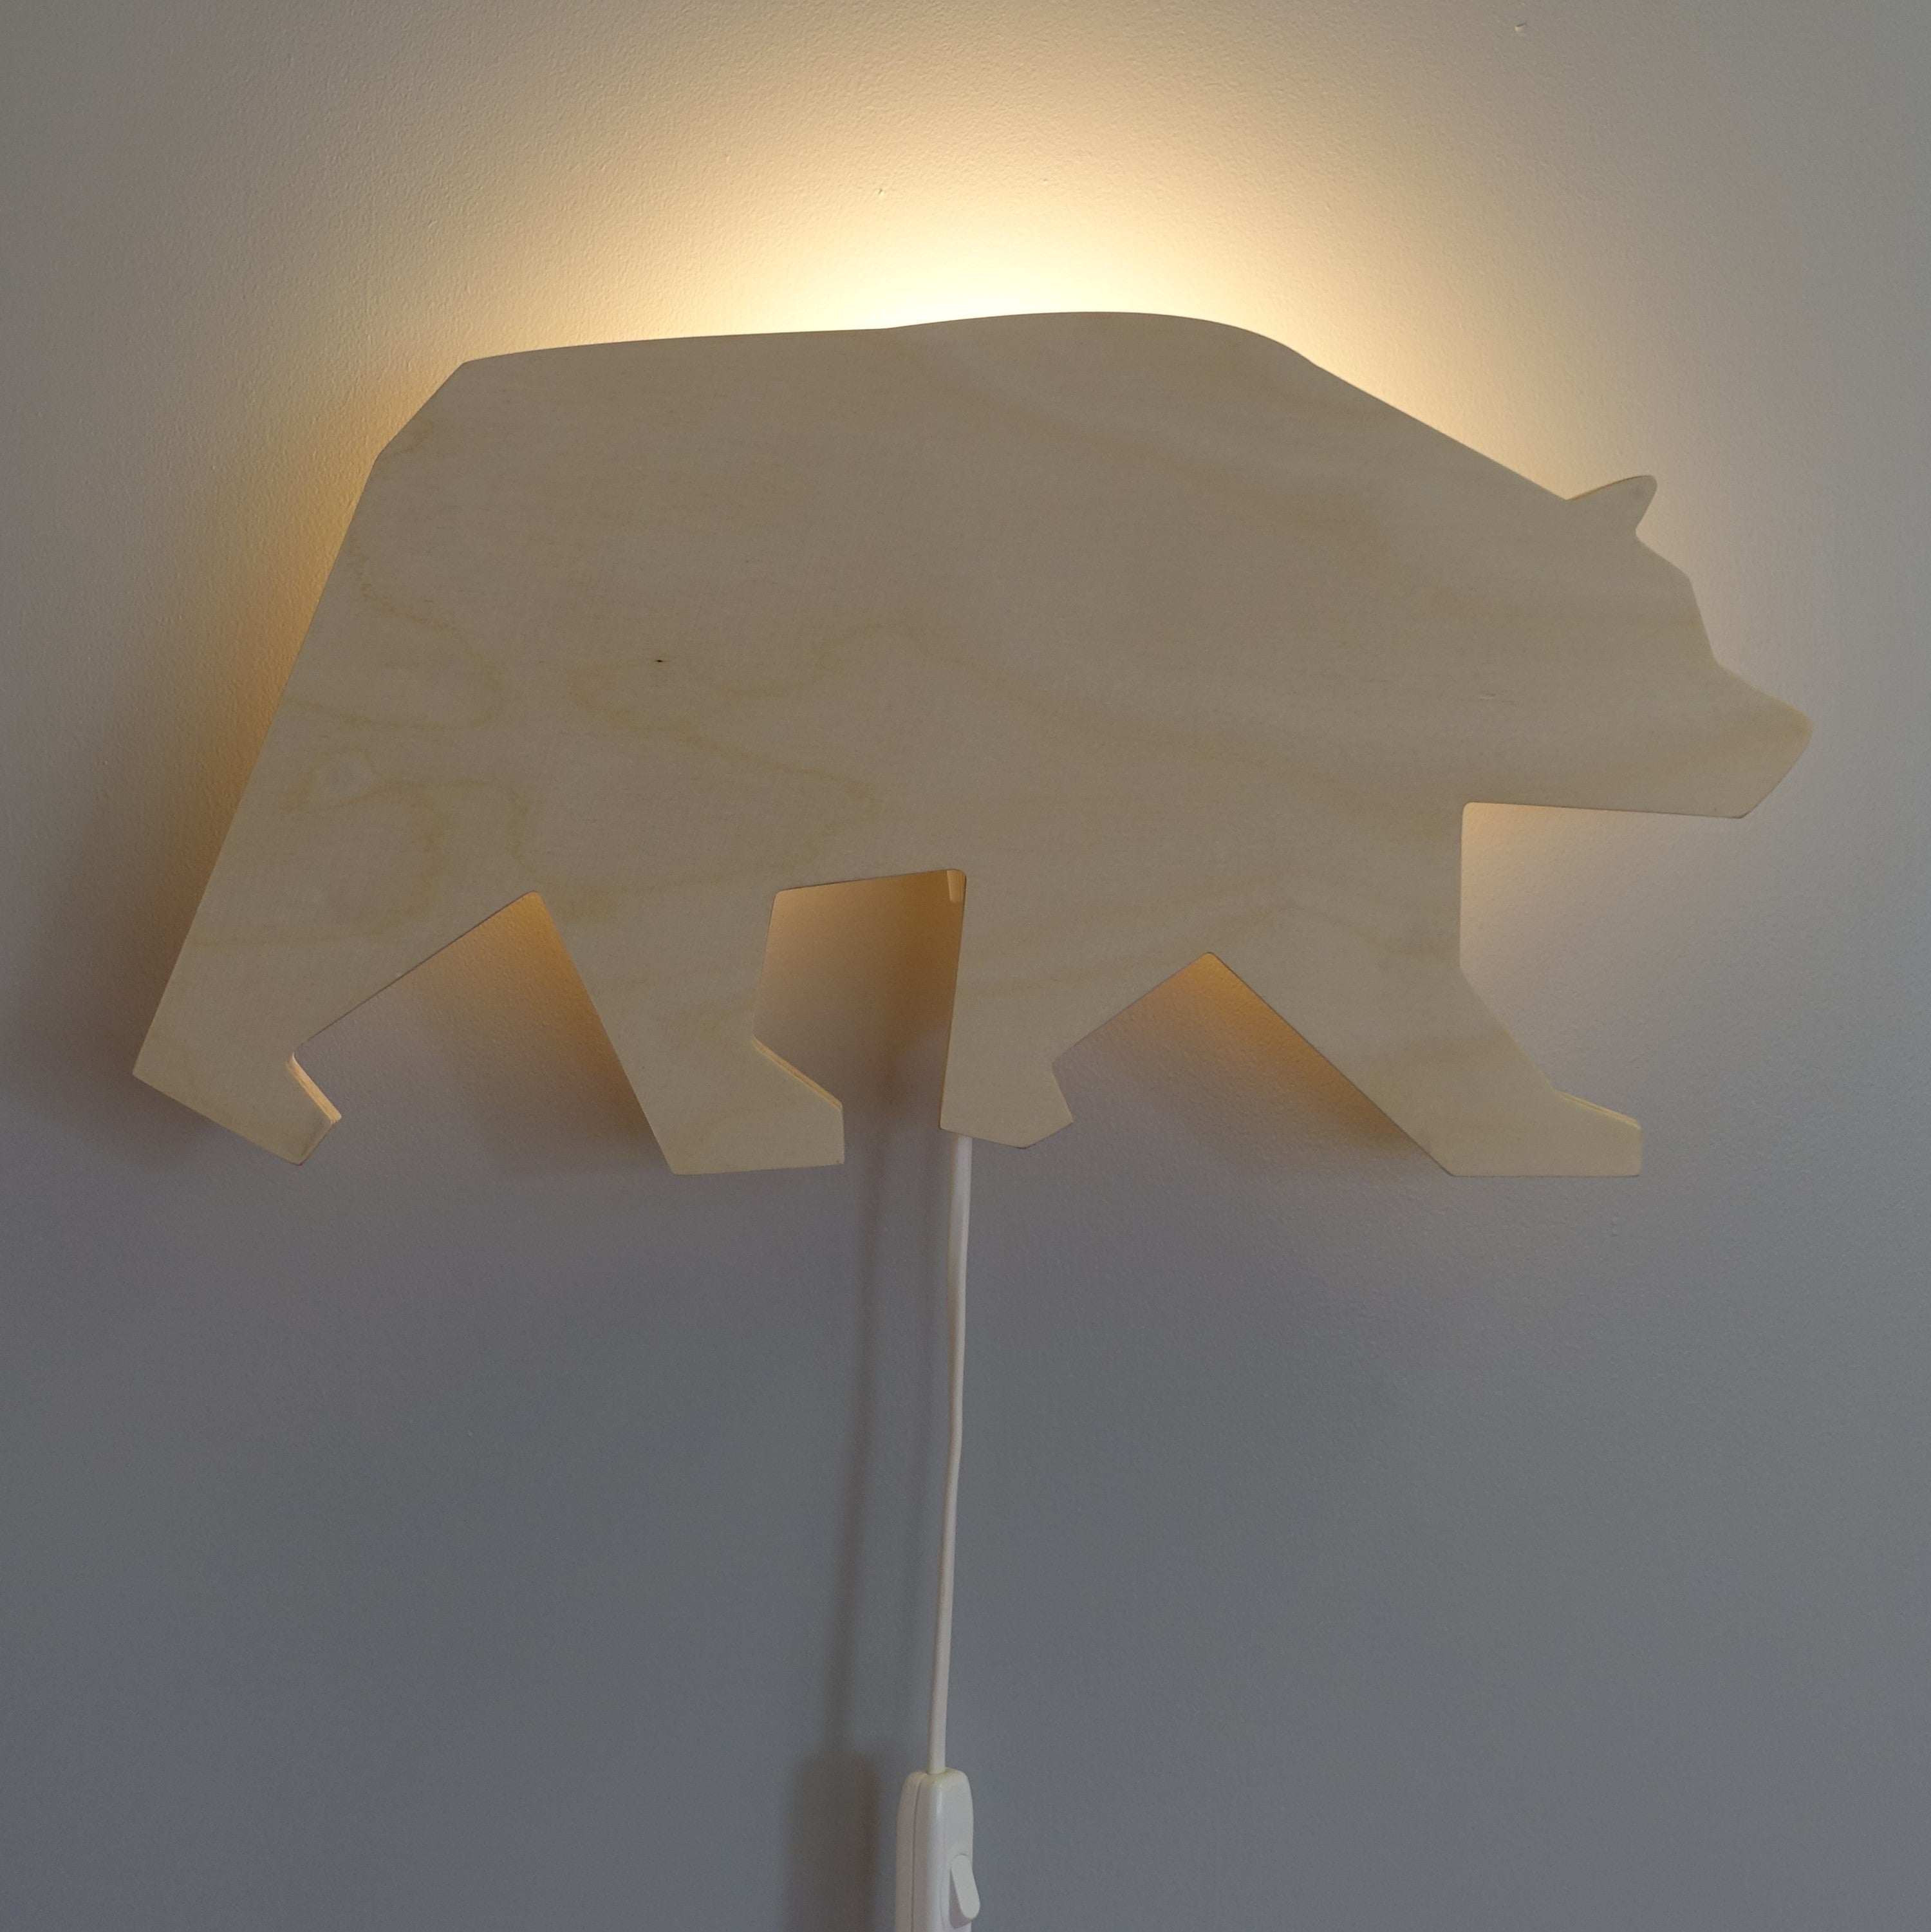 Wooden children’s room wall lamp | Bear, plywood - toddie.com